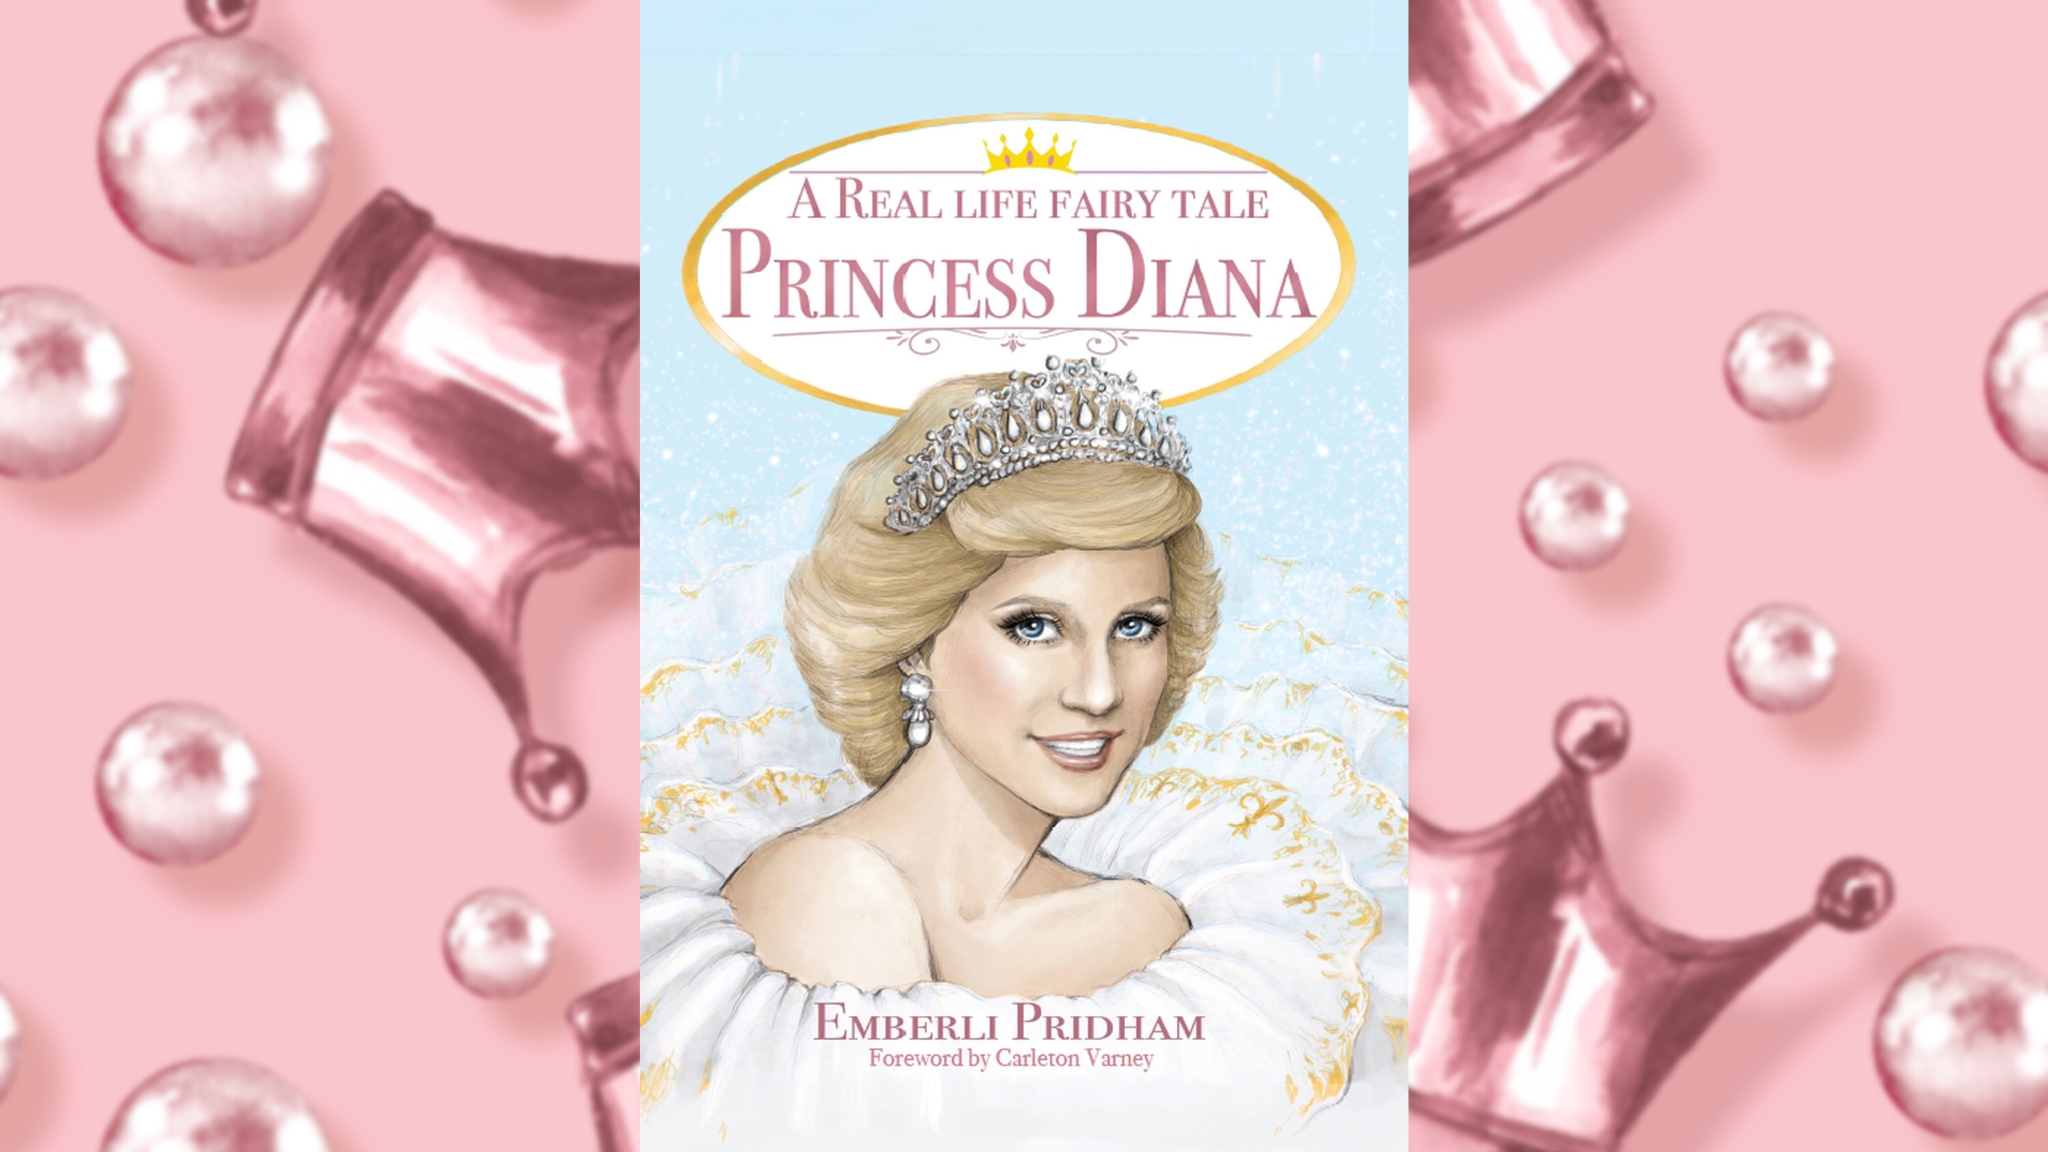 Children’s Illustrated Biography Passes on the Legacy of Princess Diana